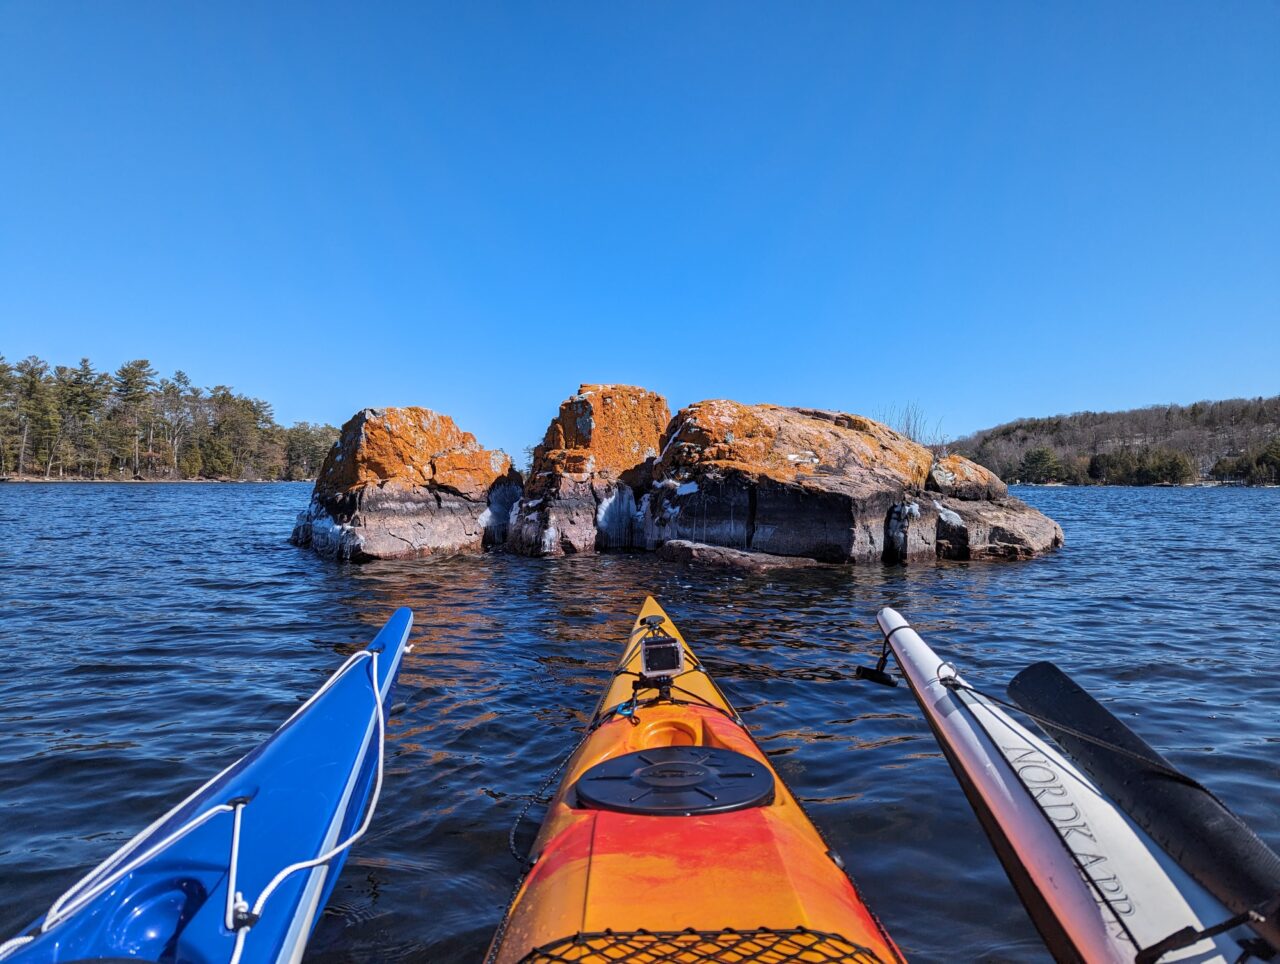 3 kayaks in water looking towards rocks popping out of the water